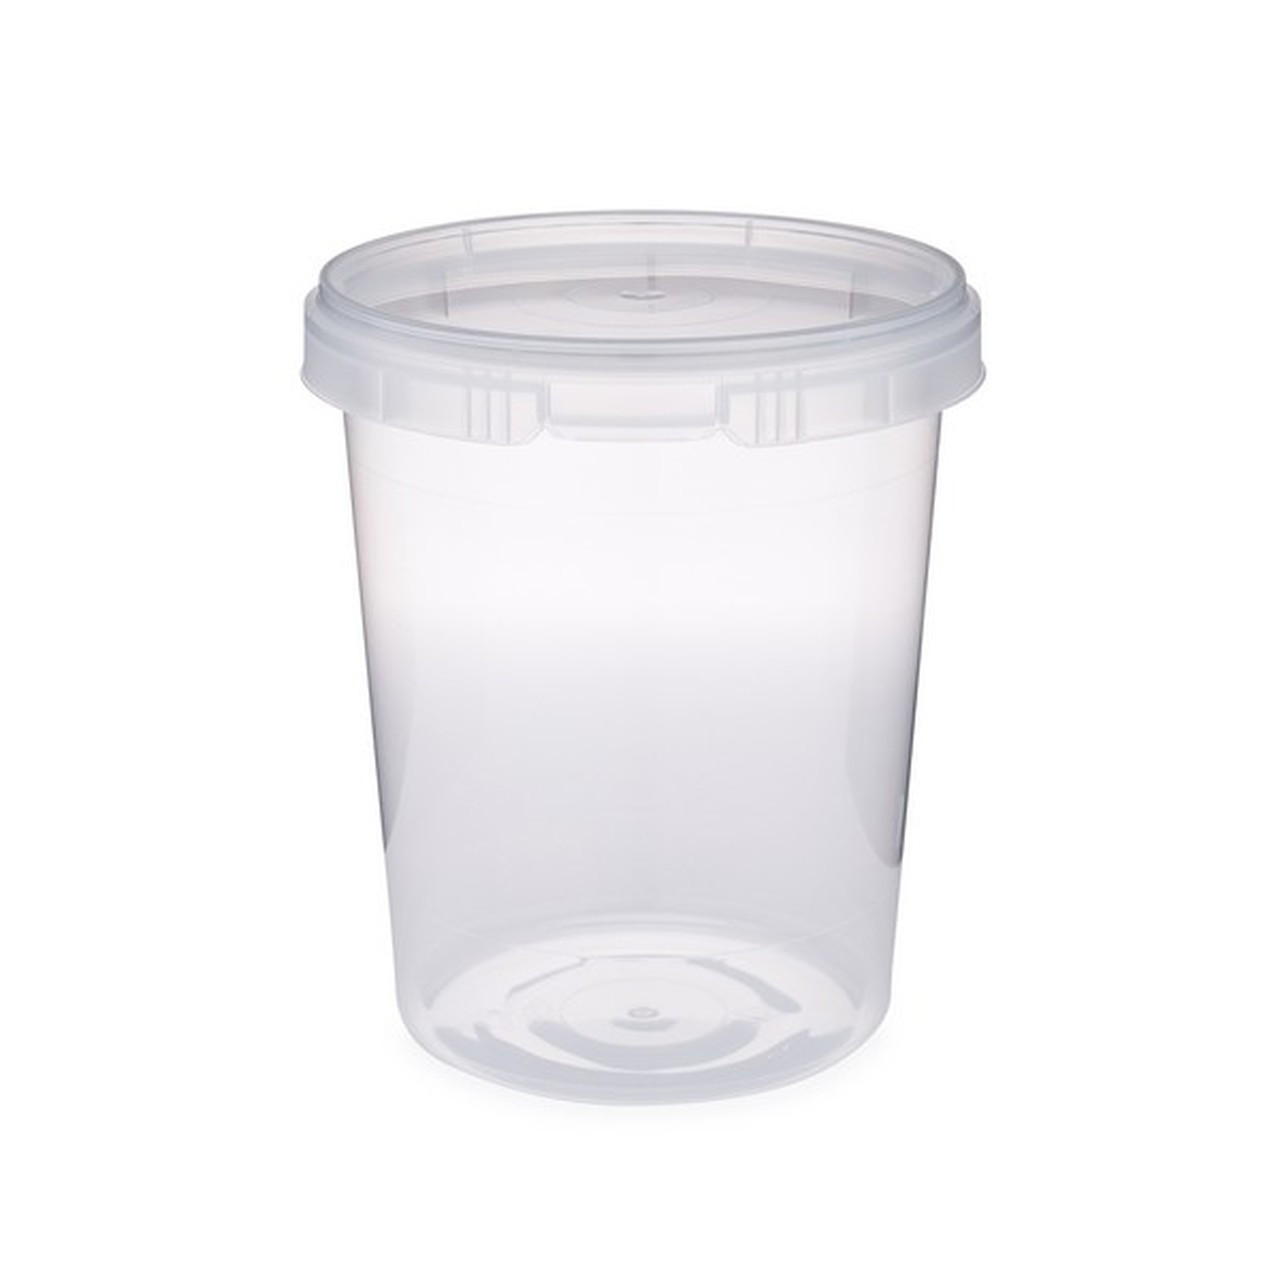 https://cdn10.bigcommerce.com/s-fo6yw/products/896/images/3006/Quart_32oz_Ink_Container_-_Snap_Lock_Lid__12219.1579897857.1280.1280.jpg?c=2